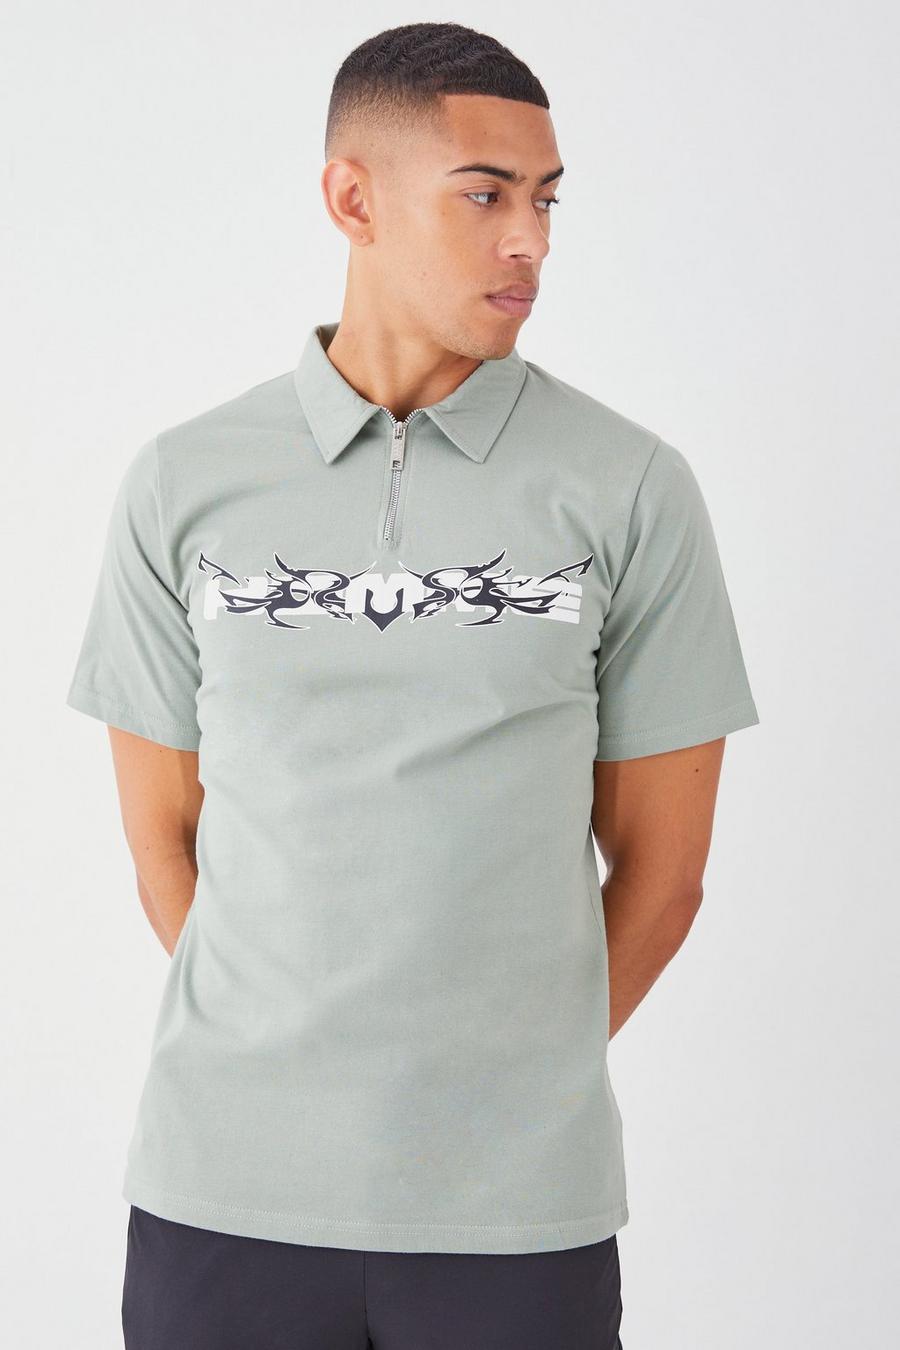 Sage Homme Graphic Polo